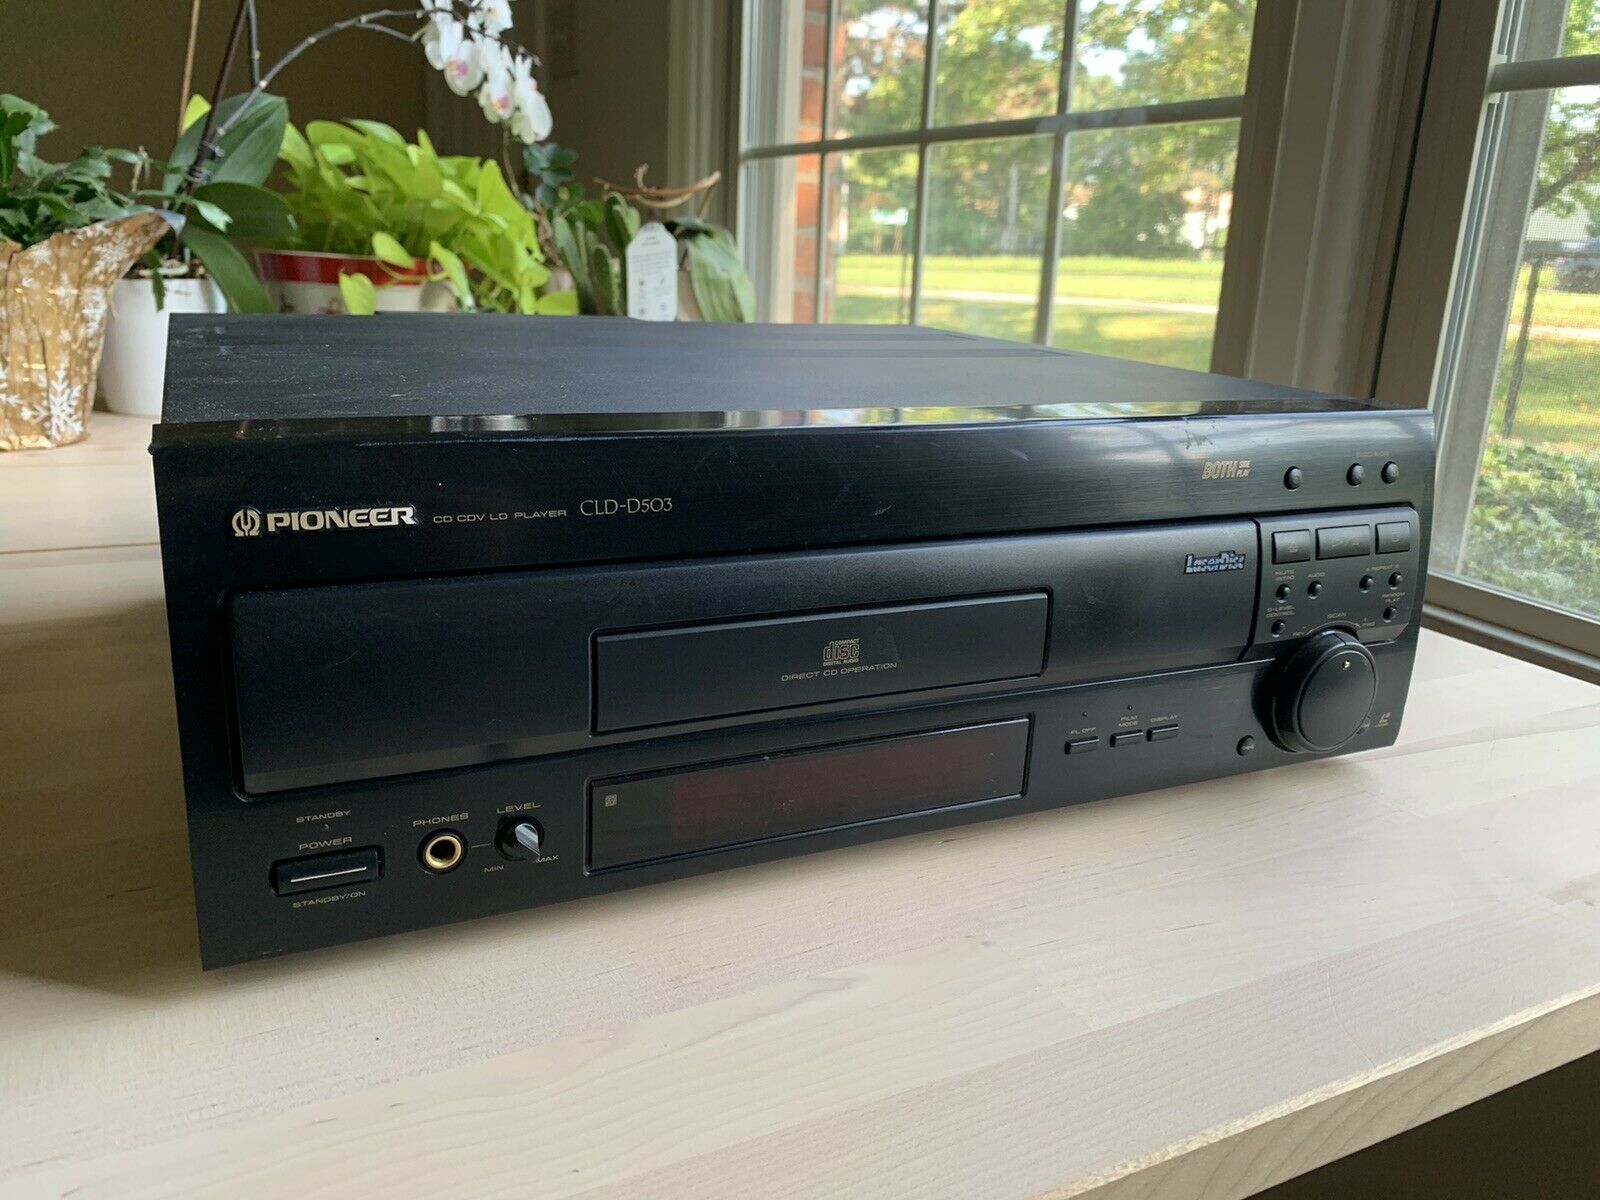 Pioneer Cld-d503 Laser Disc Player Working Plays Both Side Ld Laserdisc